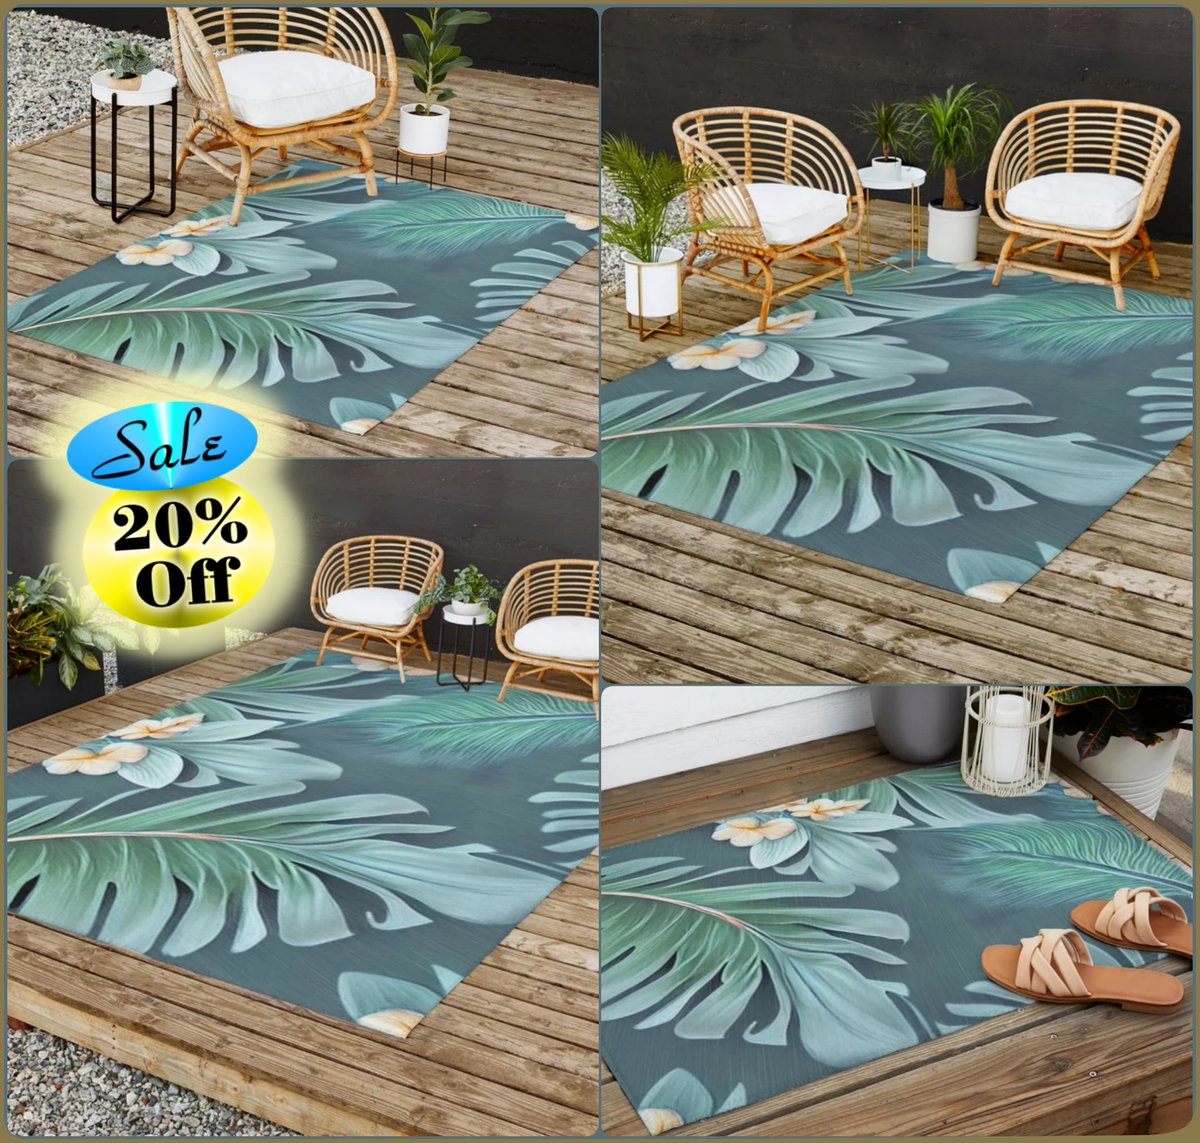 *SALE 20% Off*
Daytime Villa Outdoor Rug~by Art_Falaxy~
~Refreshingly Unique~
#artfalaxy #art #rugs #mats #homedecor #society6 #Society6max #swirls #modern #trendy #accents #floorrugs #welcome #outdoorrugs

society6.com/product/daytim…
COLLECTION: society6.com/art/daytime-vi…